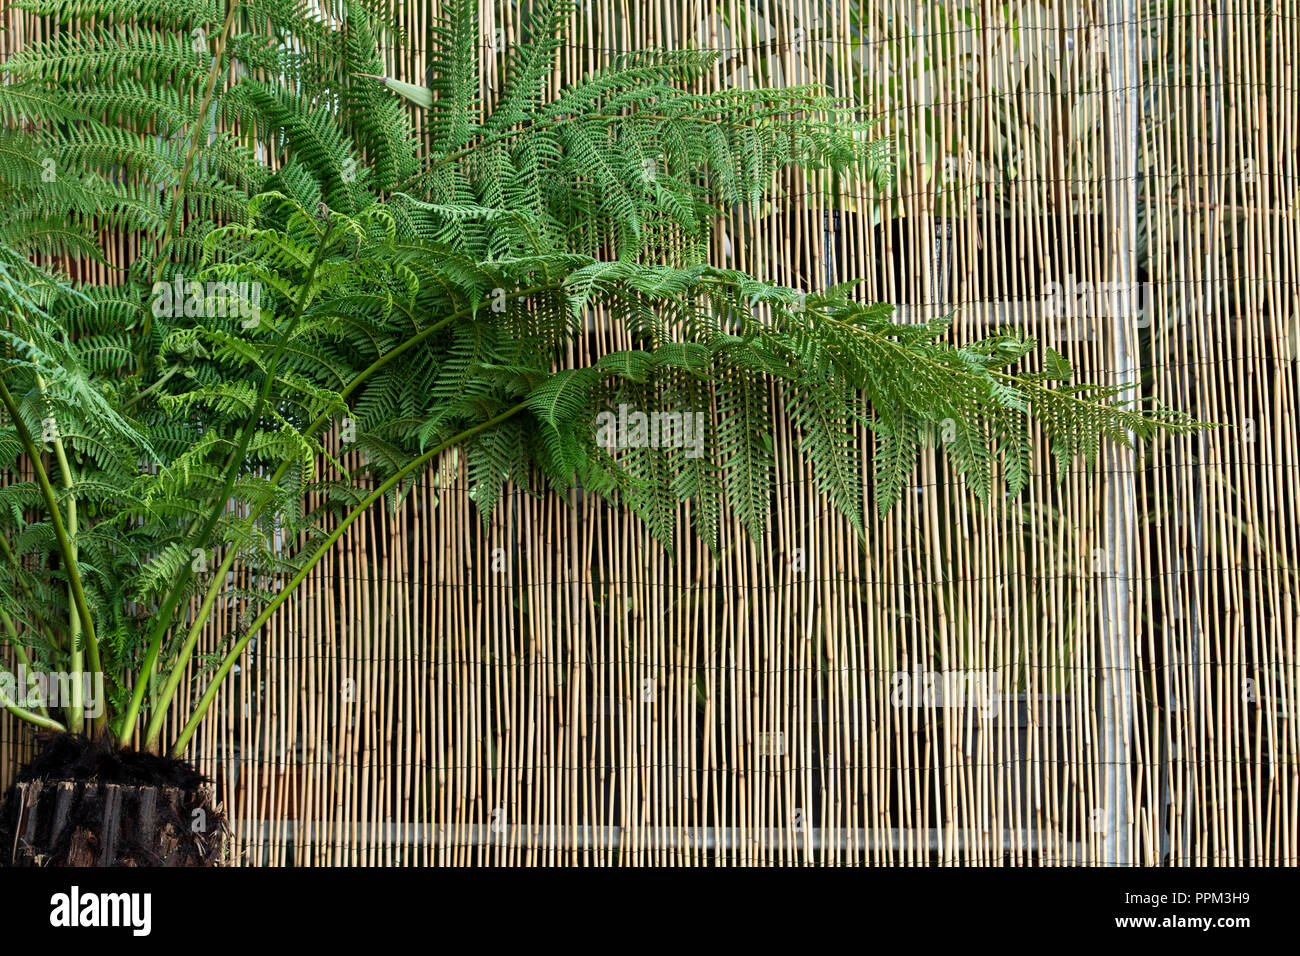 Dicksonia antarctica. Tree fern fern leaning against a bamboo screen at a flower show. UK Stock Photo